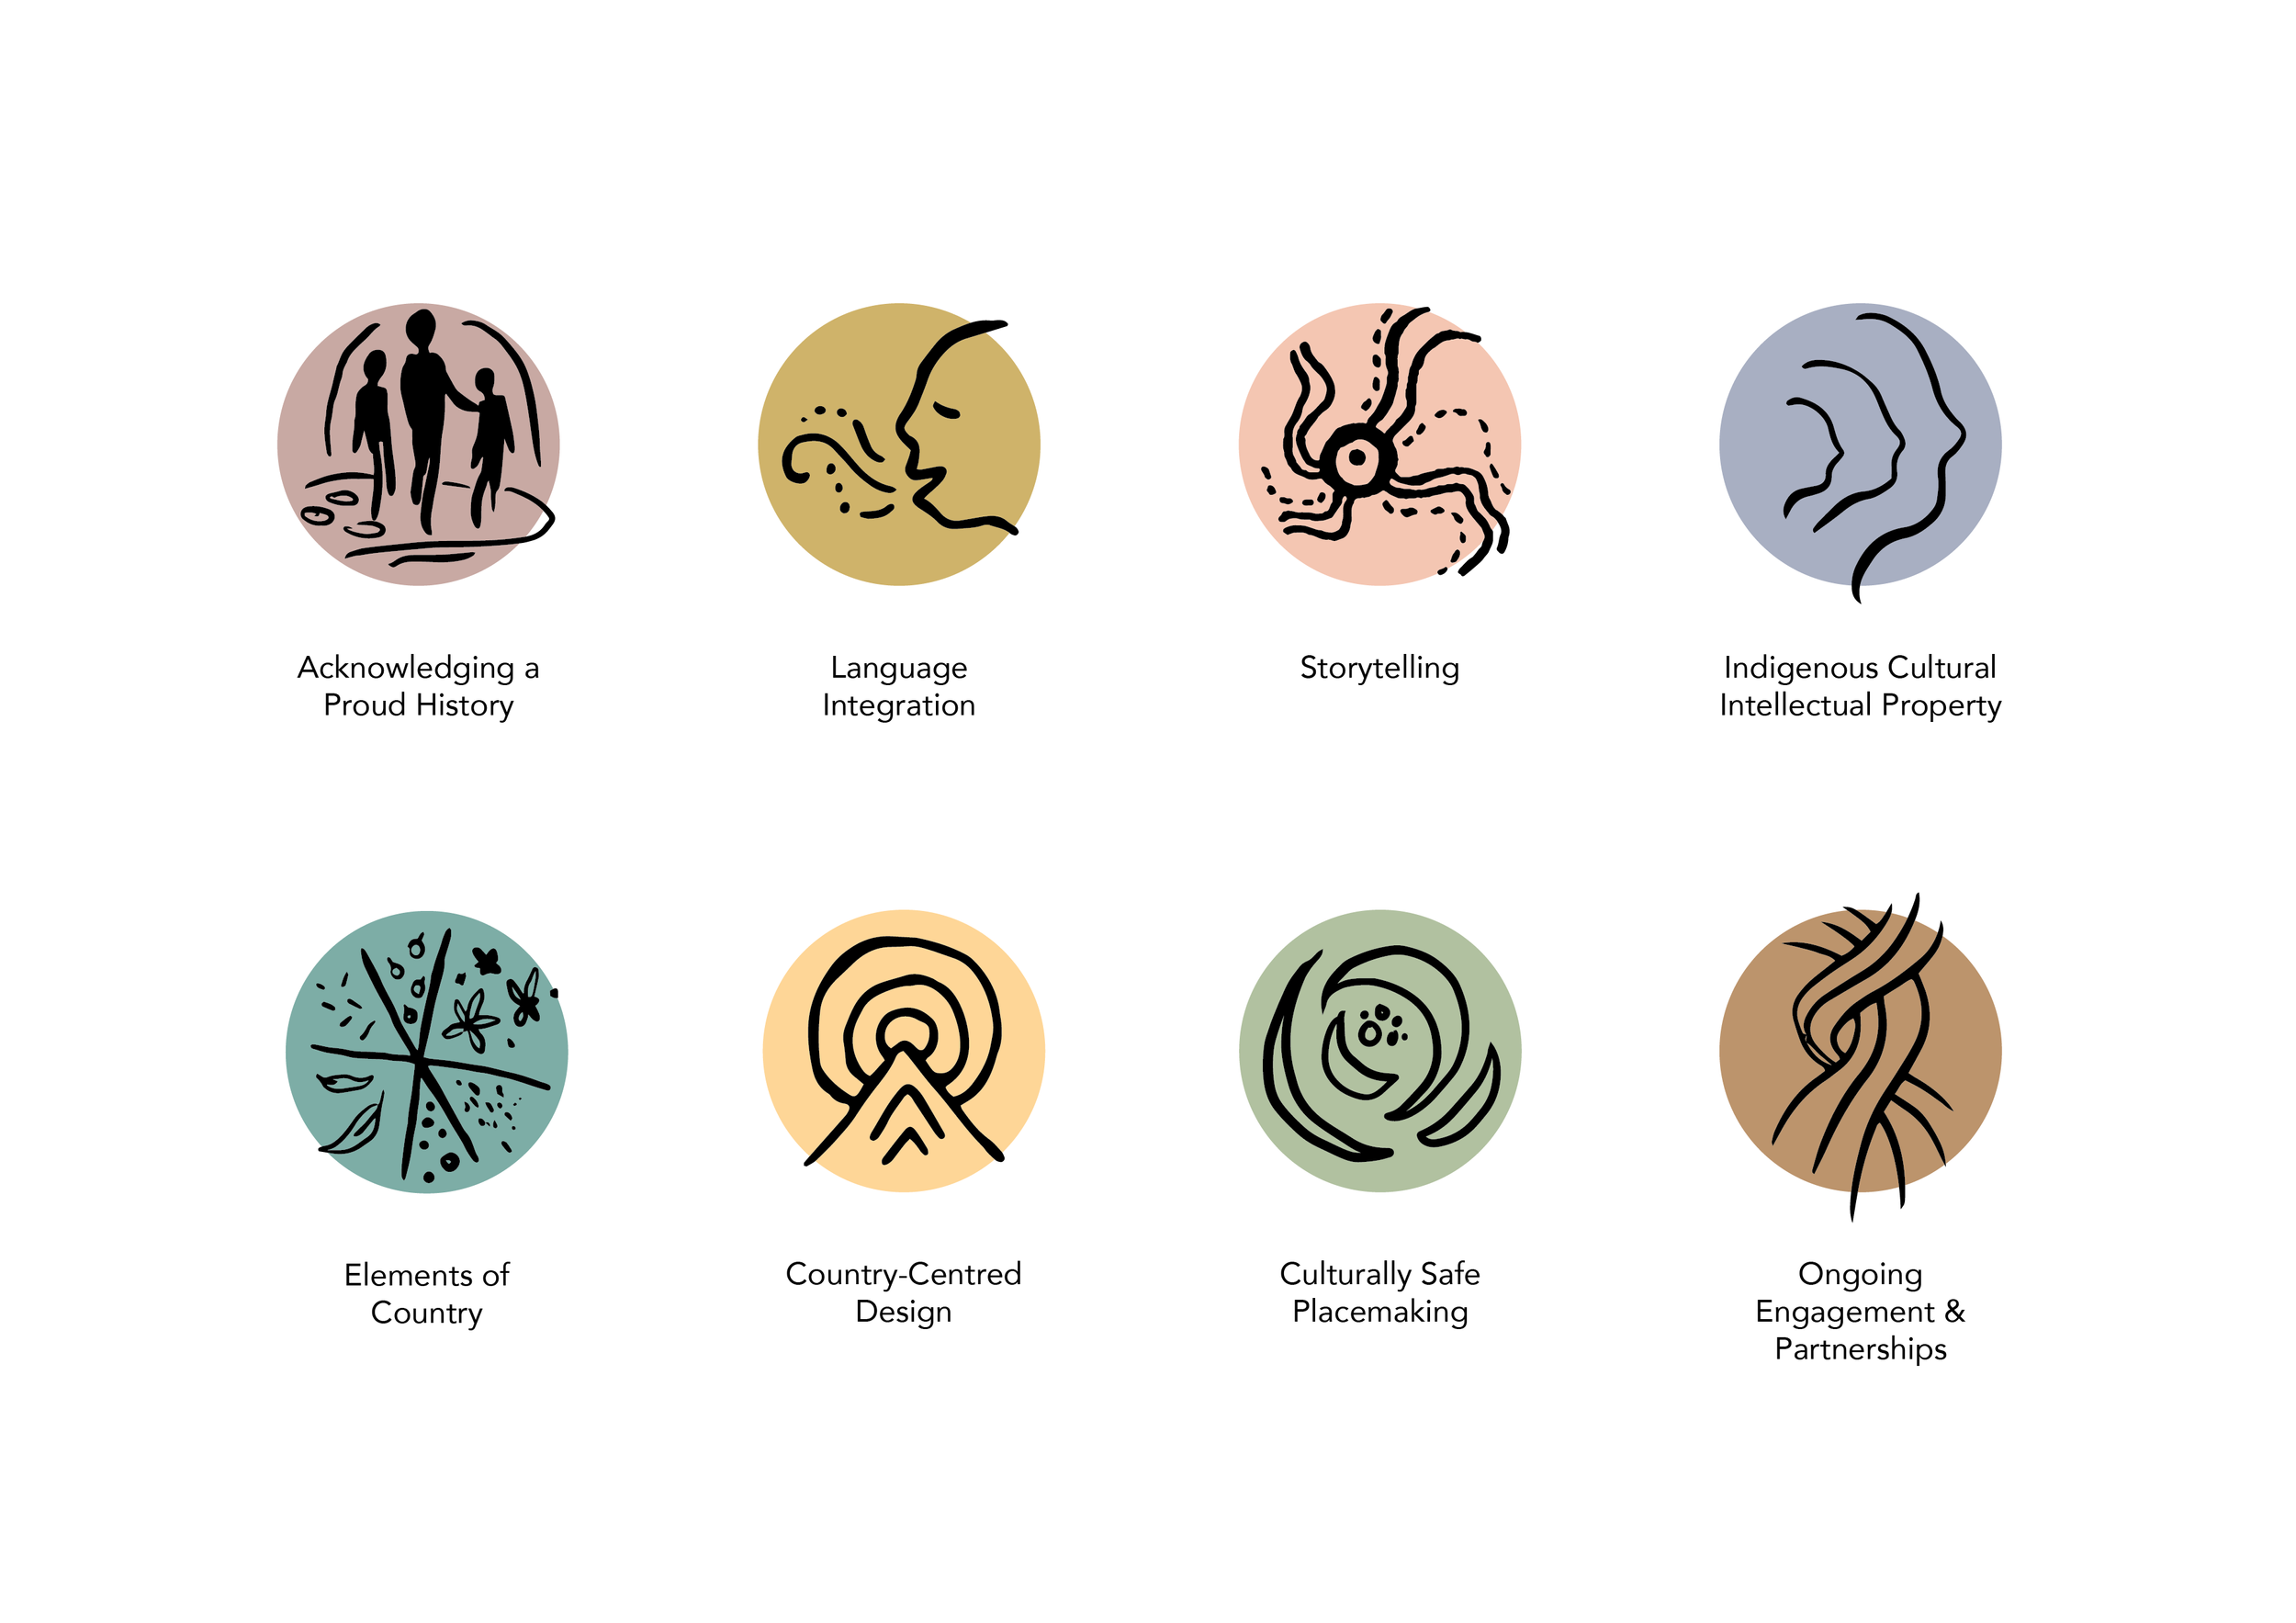 Location-specific Icons for Cultural Design Principles